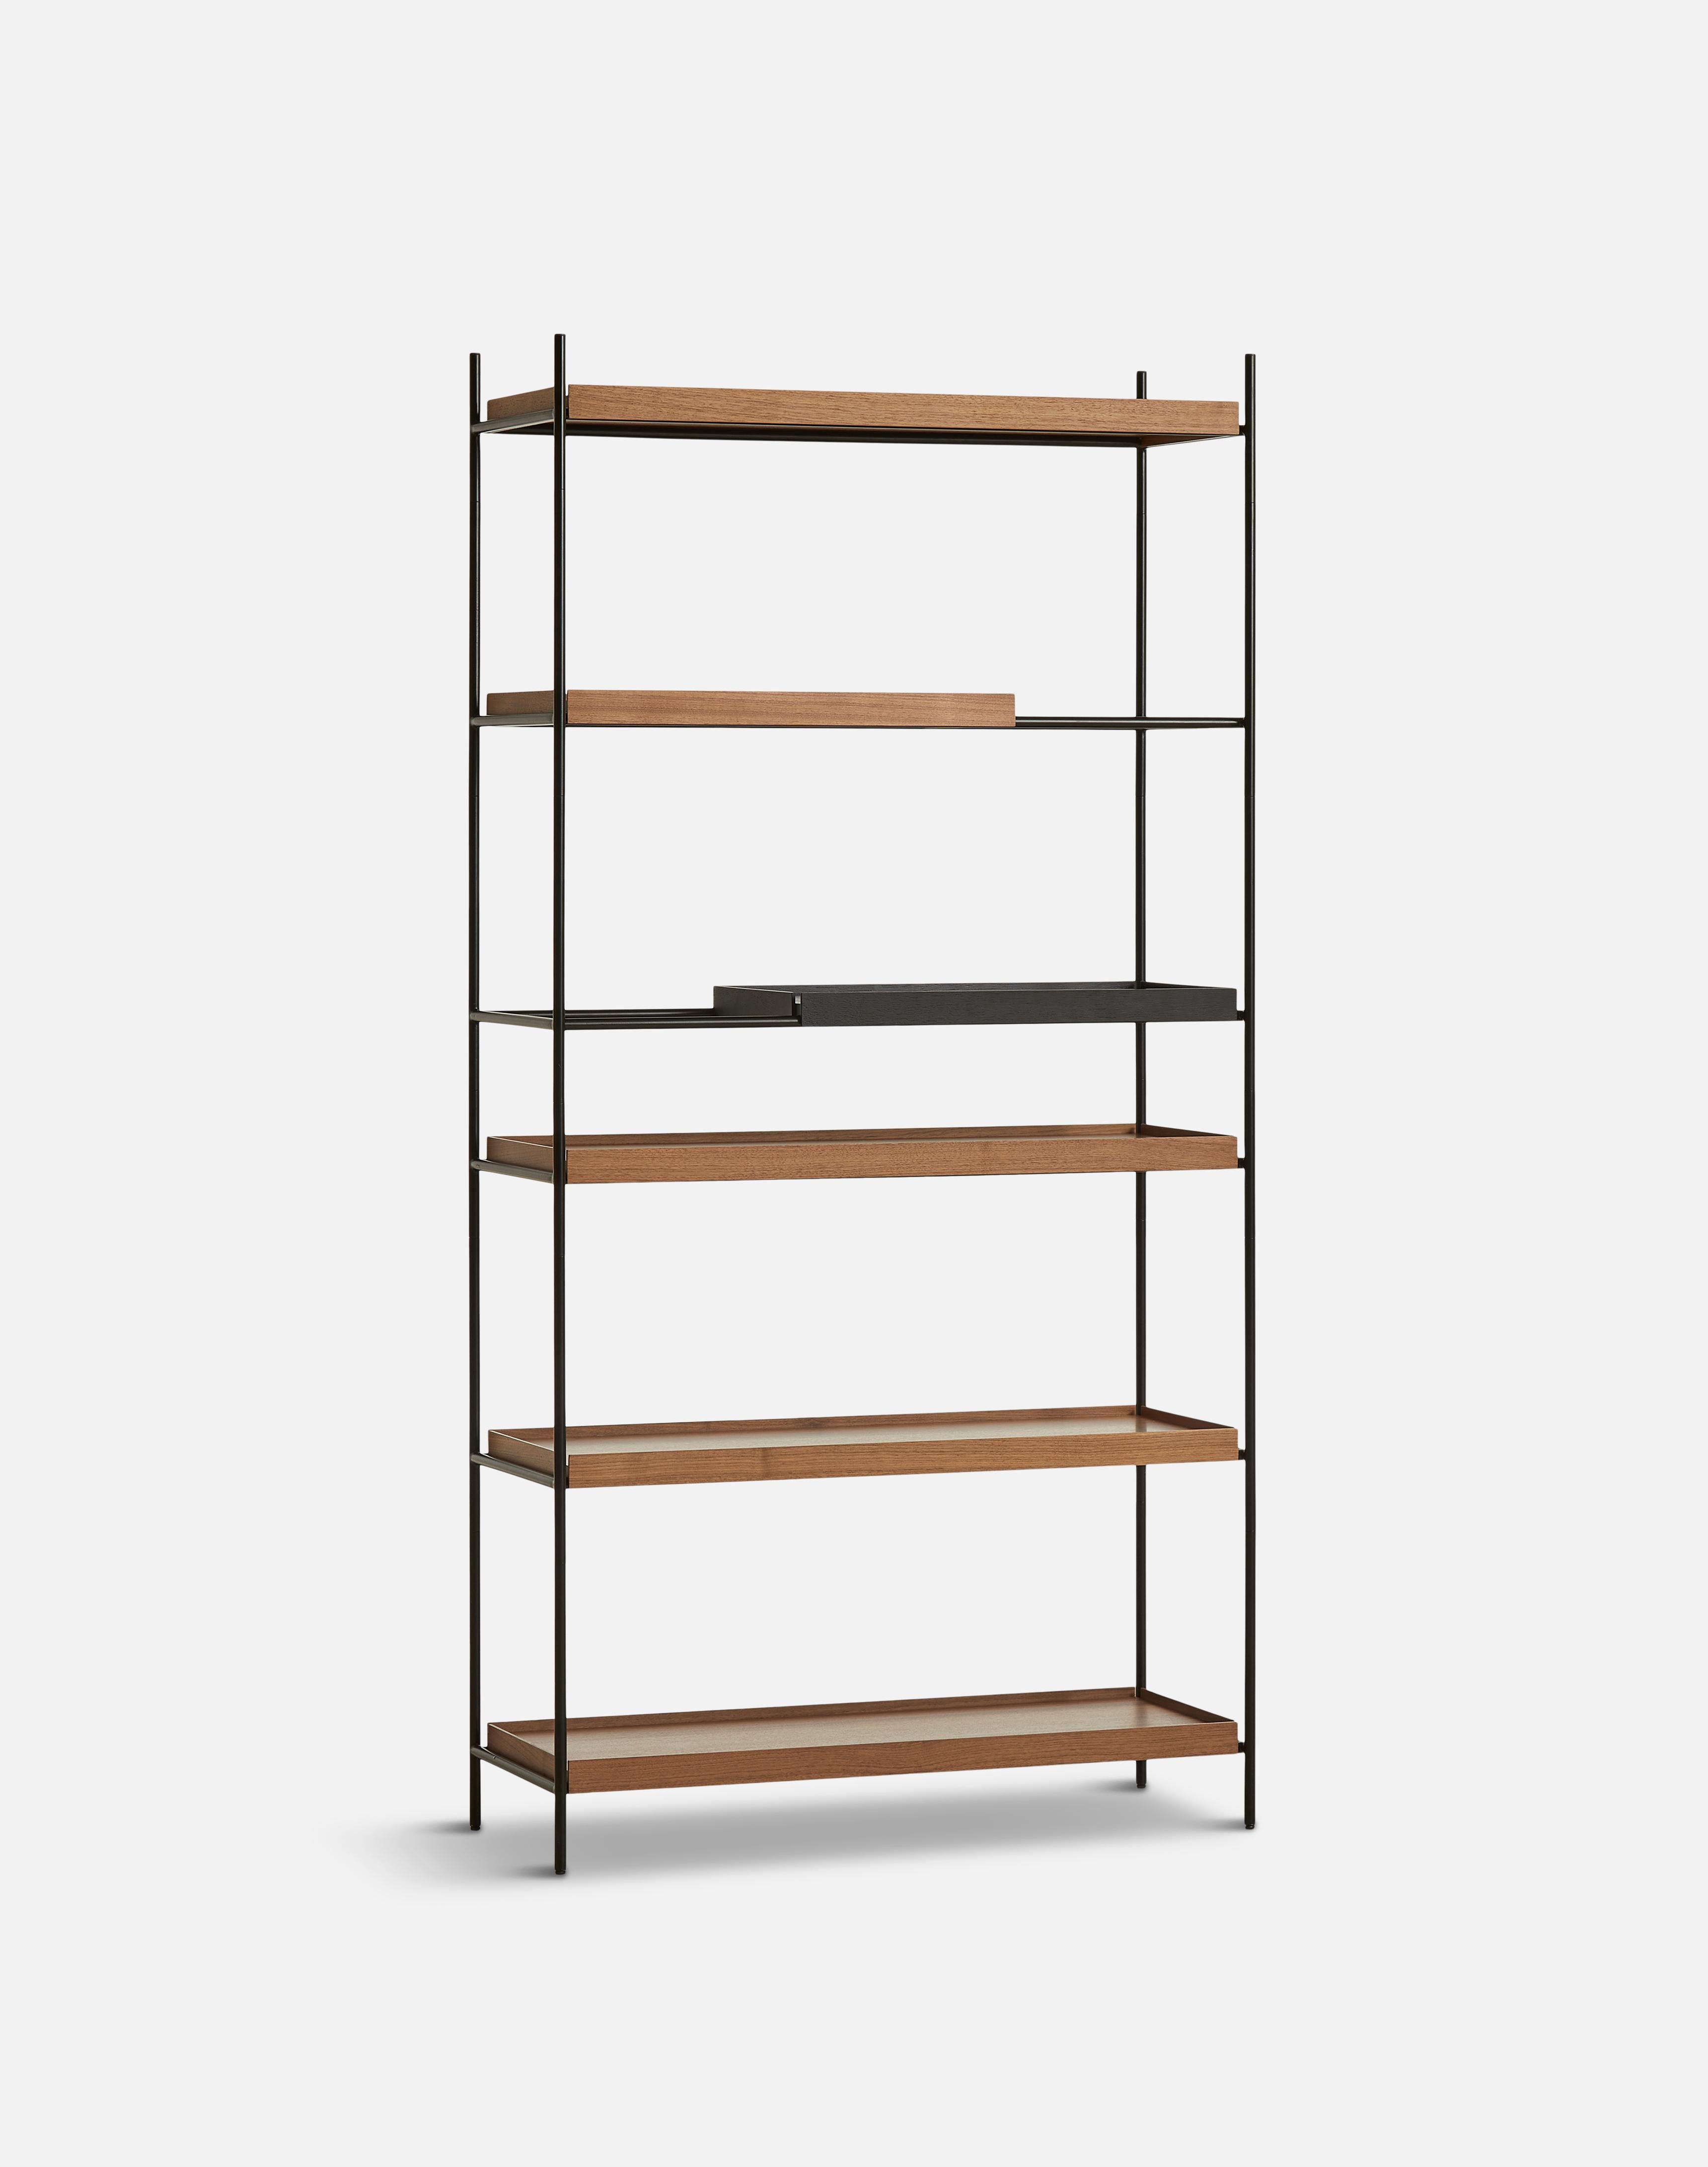 High walnut and black tray shelf V by Hanne Willmann
Materials: metal, walnut.
Dimensions: D 40 x W 100 x H 201 cm
Also available in different tray conbinations and 2 sizes: H81, H 201 cm.

Hanne Willmann is a dynamic German designer with her